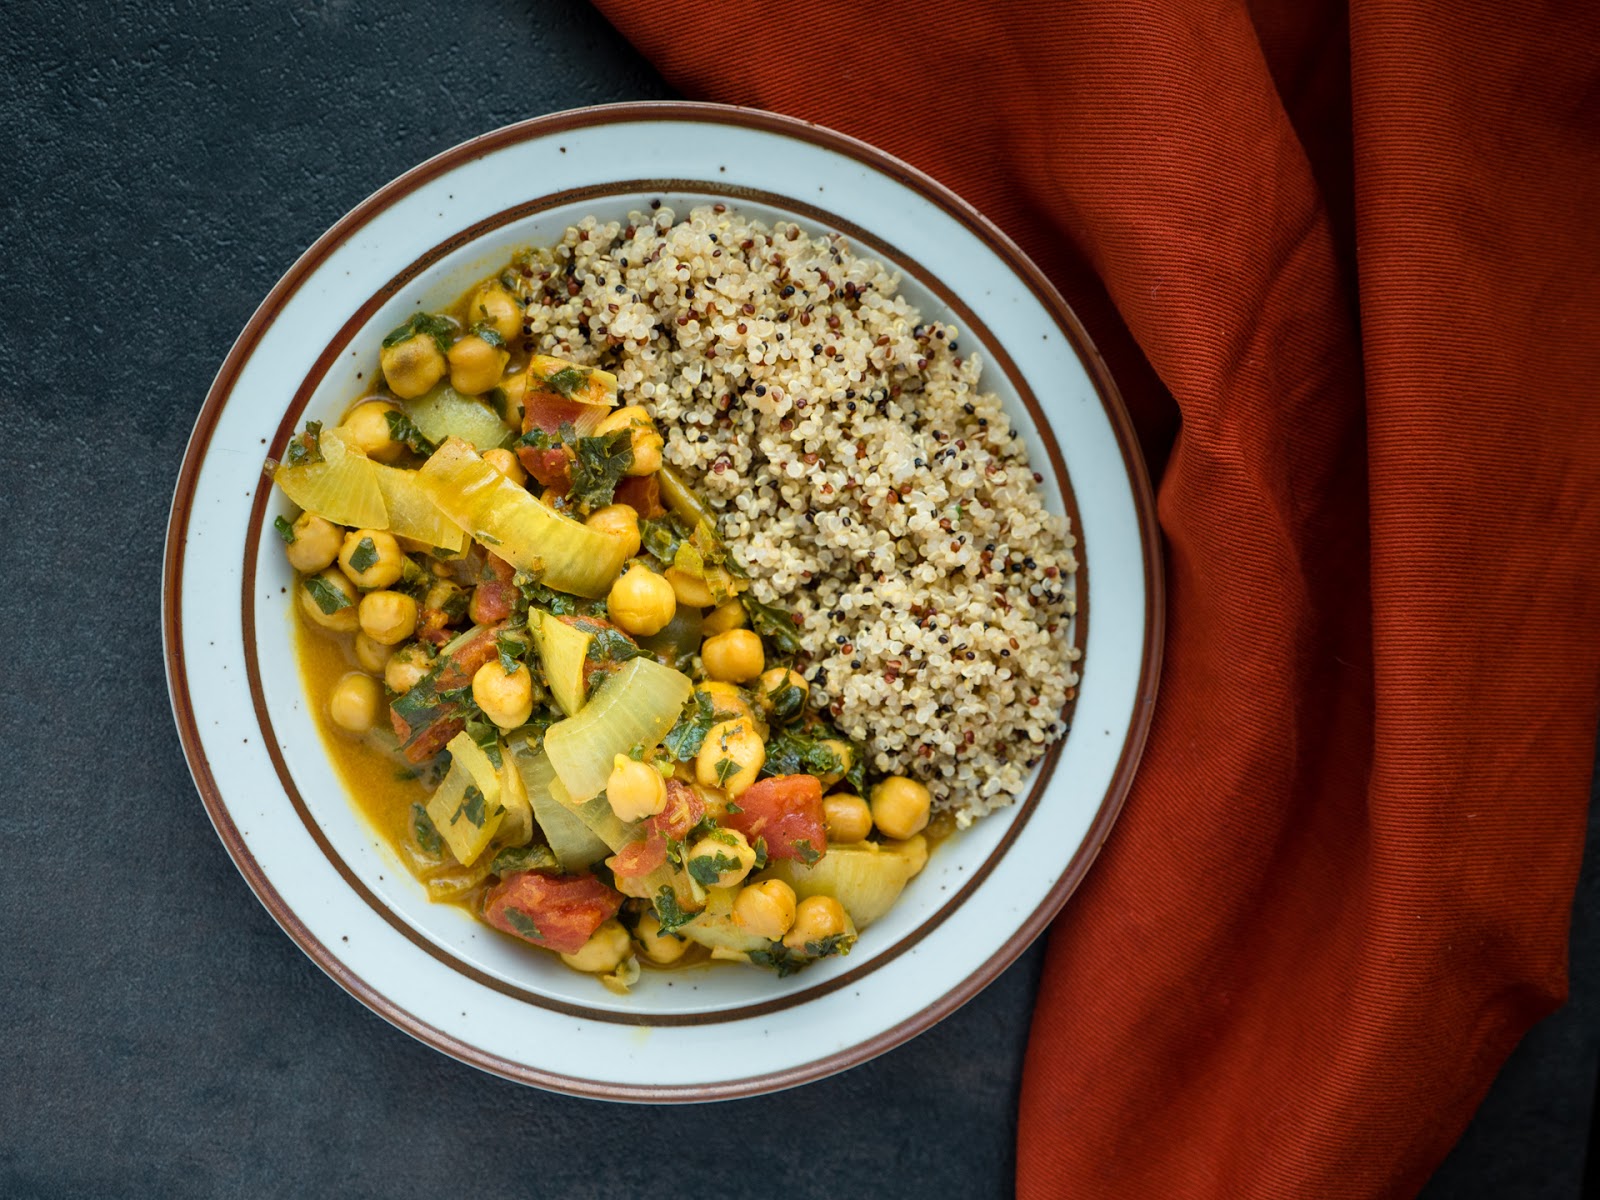 Minimal prep. maximum flavor. This vegan slow cooker chickpea curry filled is healthy, hearty, and chock full of aromatic spices.| Local Food Rocks